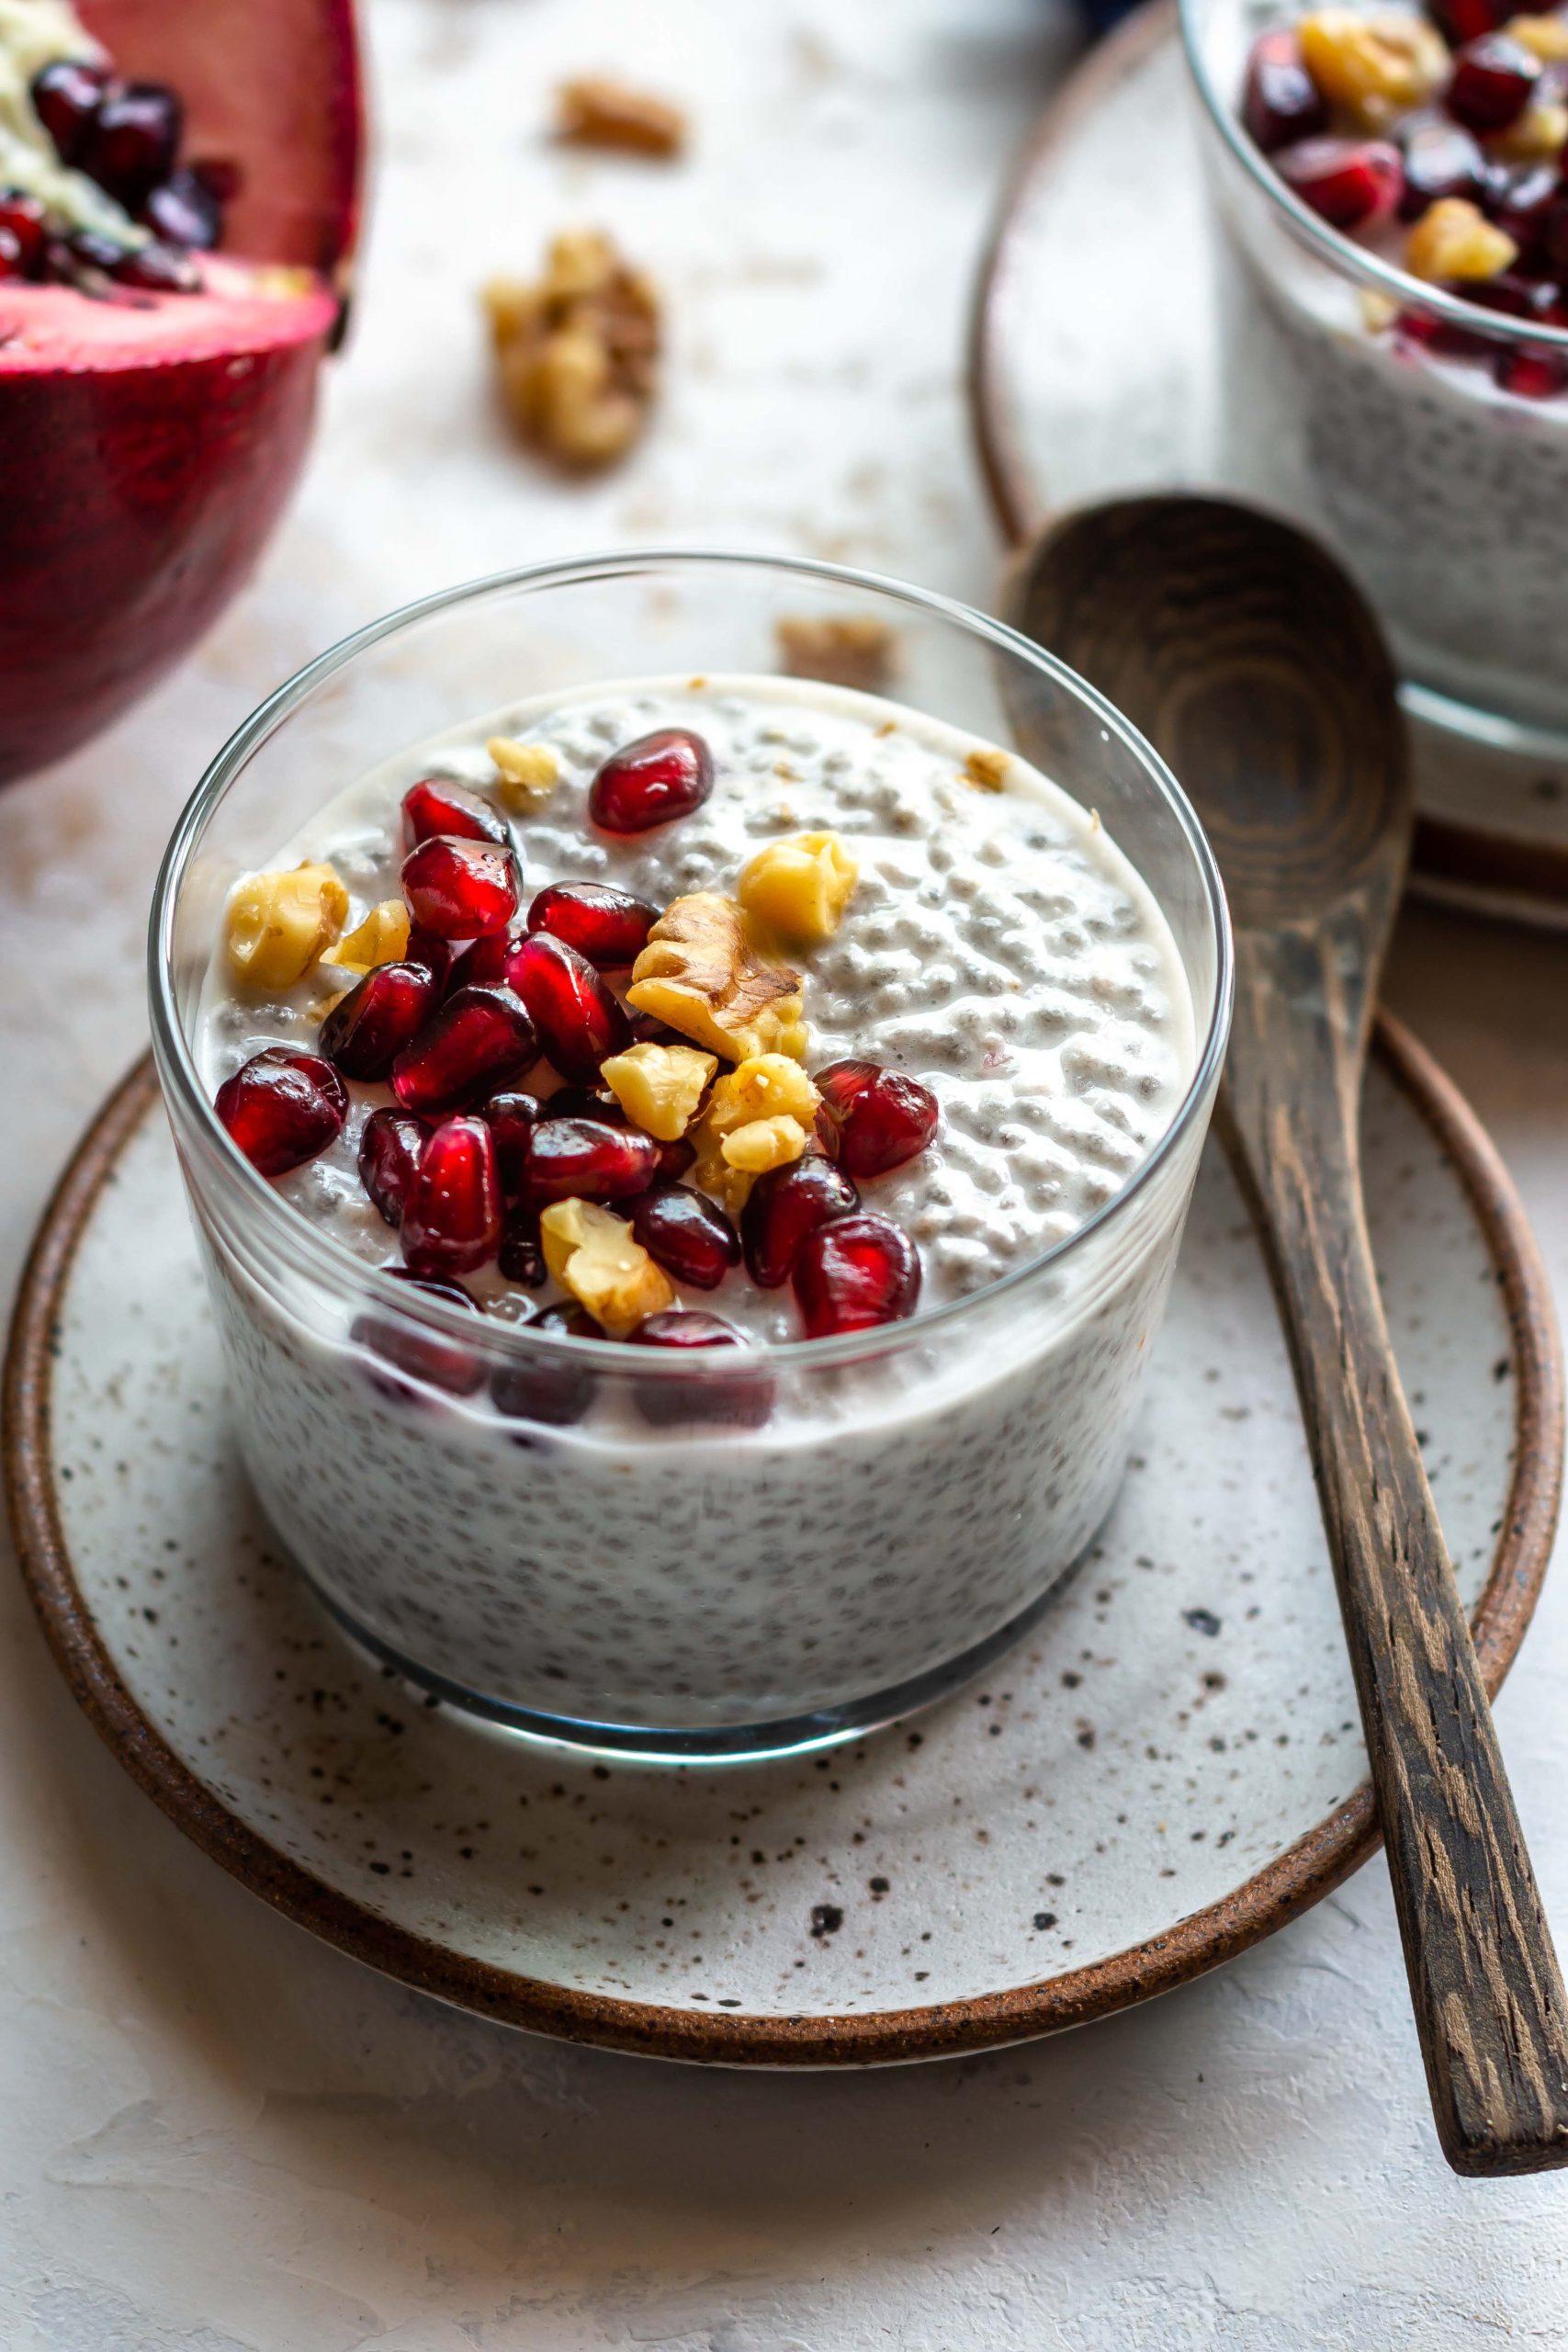 coconut chia pudding in a glass bowl with pomegranate seeds on top